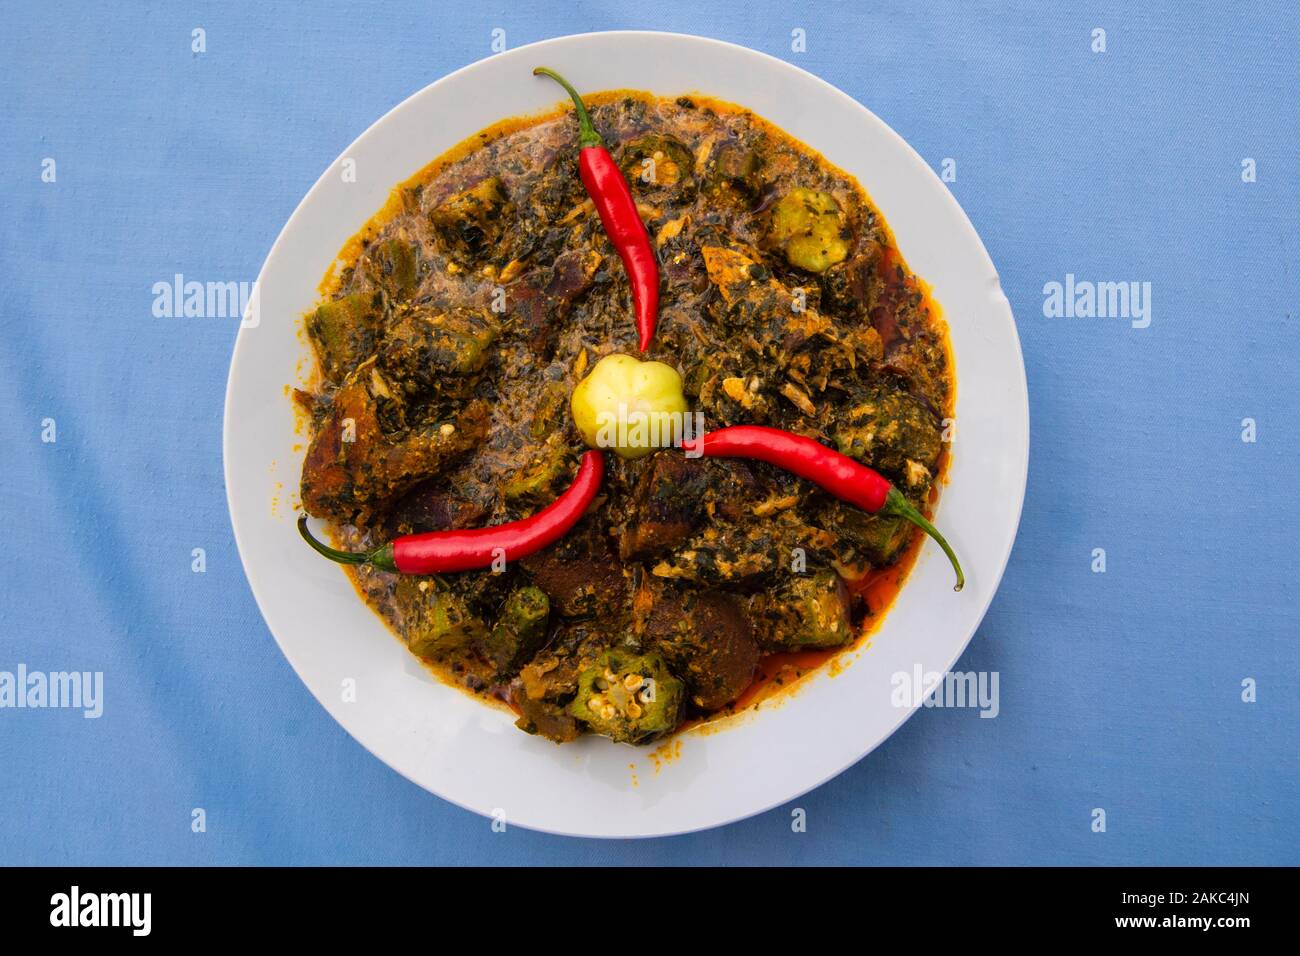 Benin, Atacora area, Nothern district, traditional dish from the north of the country consisting of smoked fish, beef fat, fresh okra, palm oil with a local basil sauce called Azéo Stock Photo